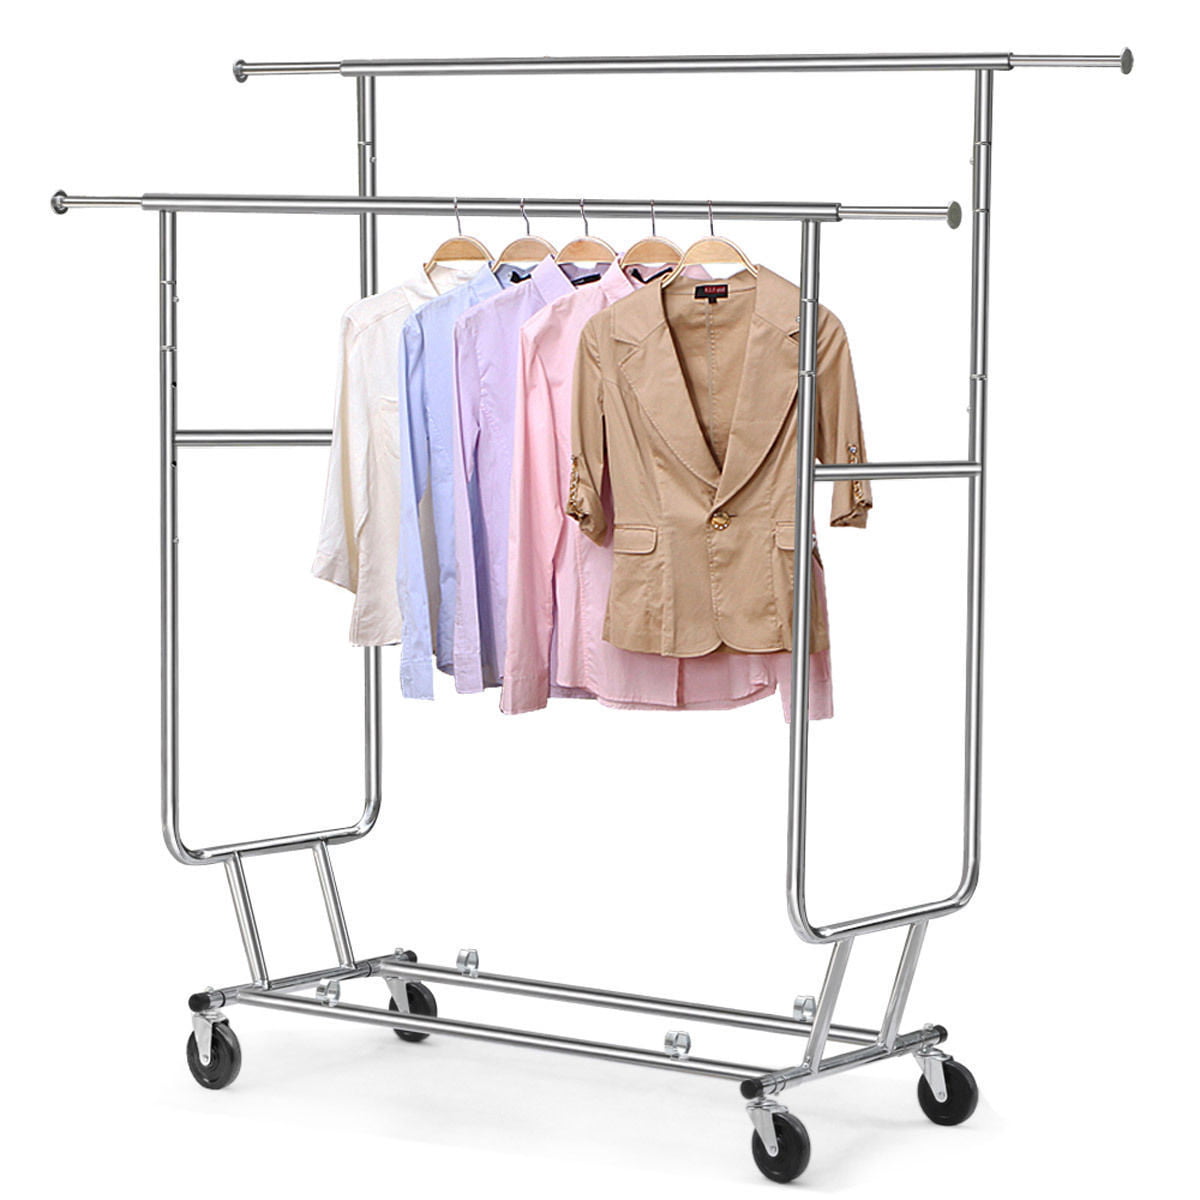 Heavy Duty Commercial Garment Rack Rolling Collapsible Clothing Shelf Chrome 